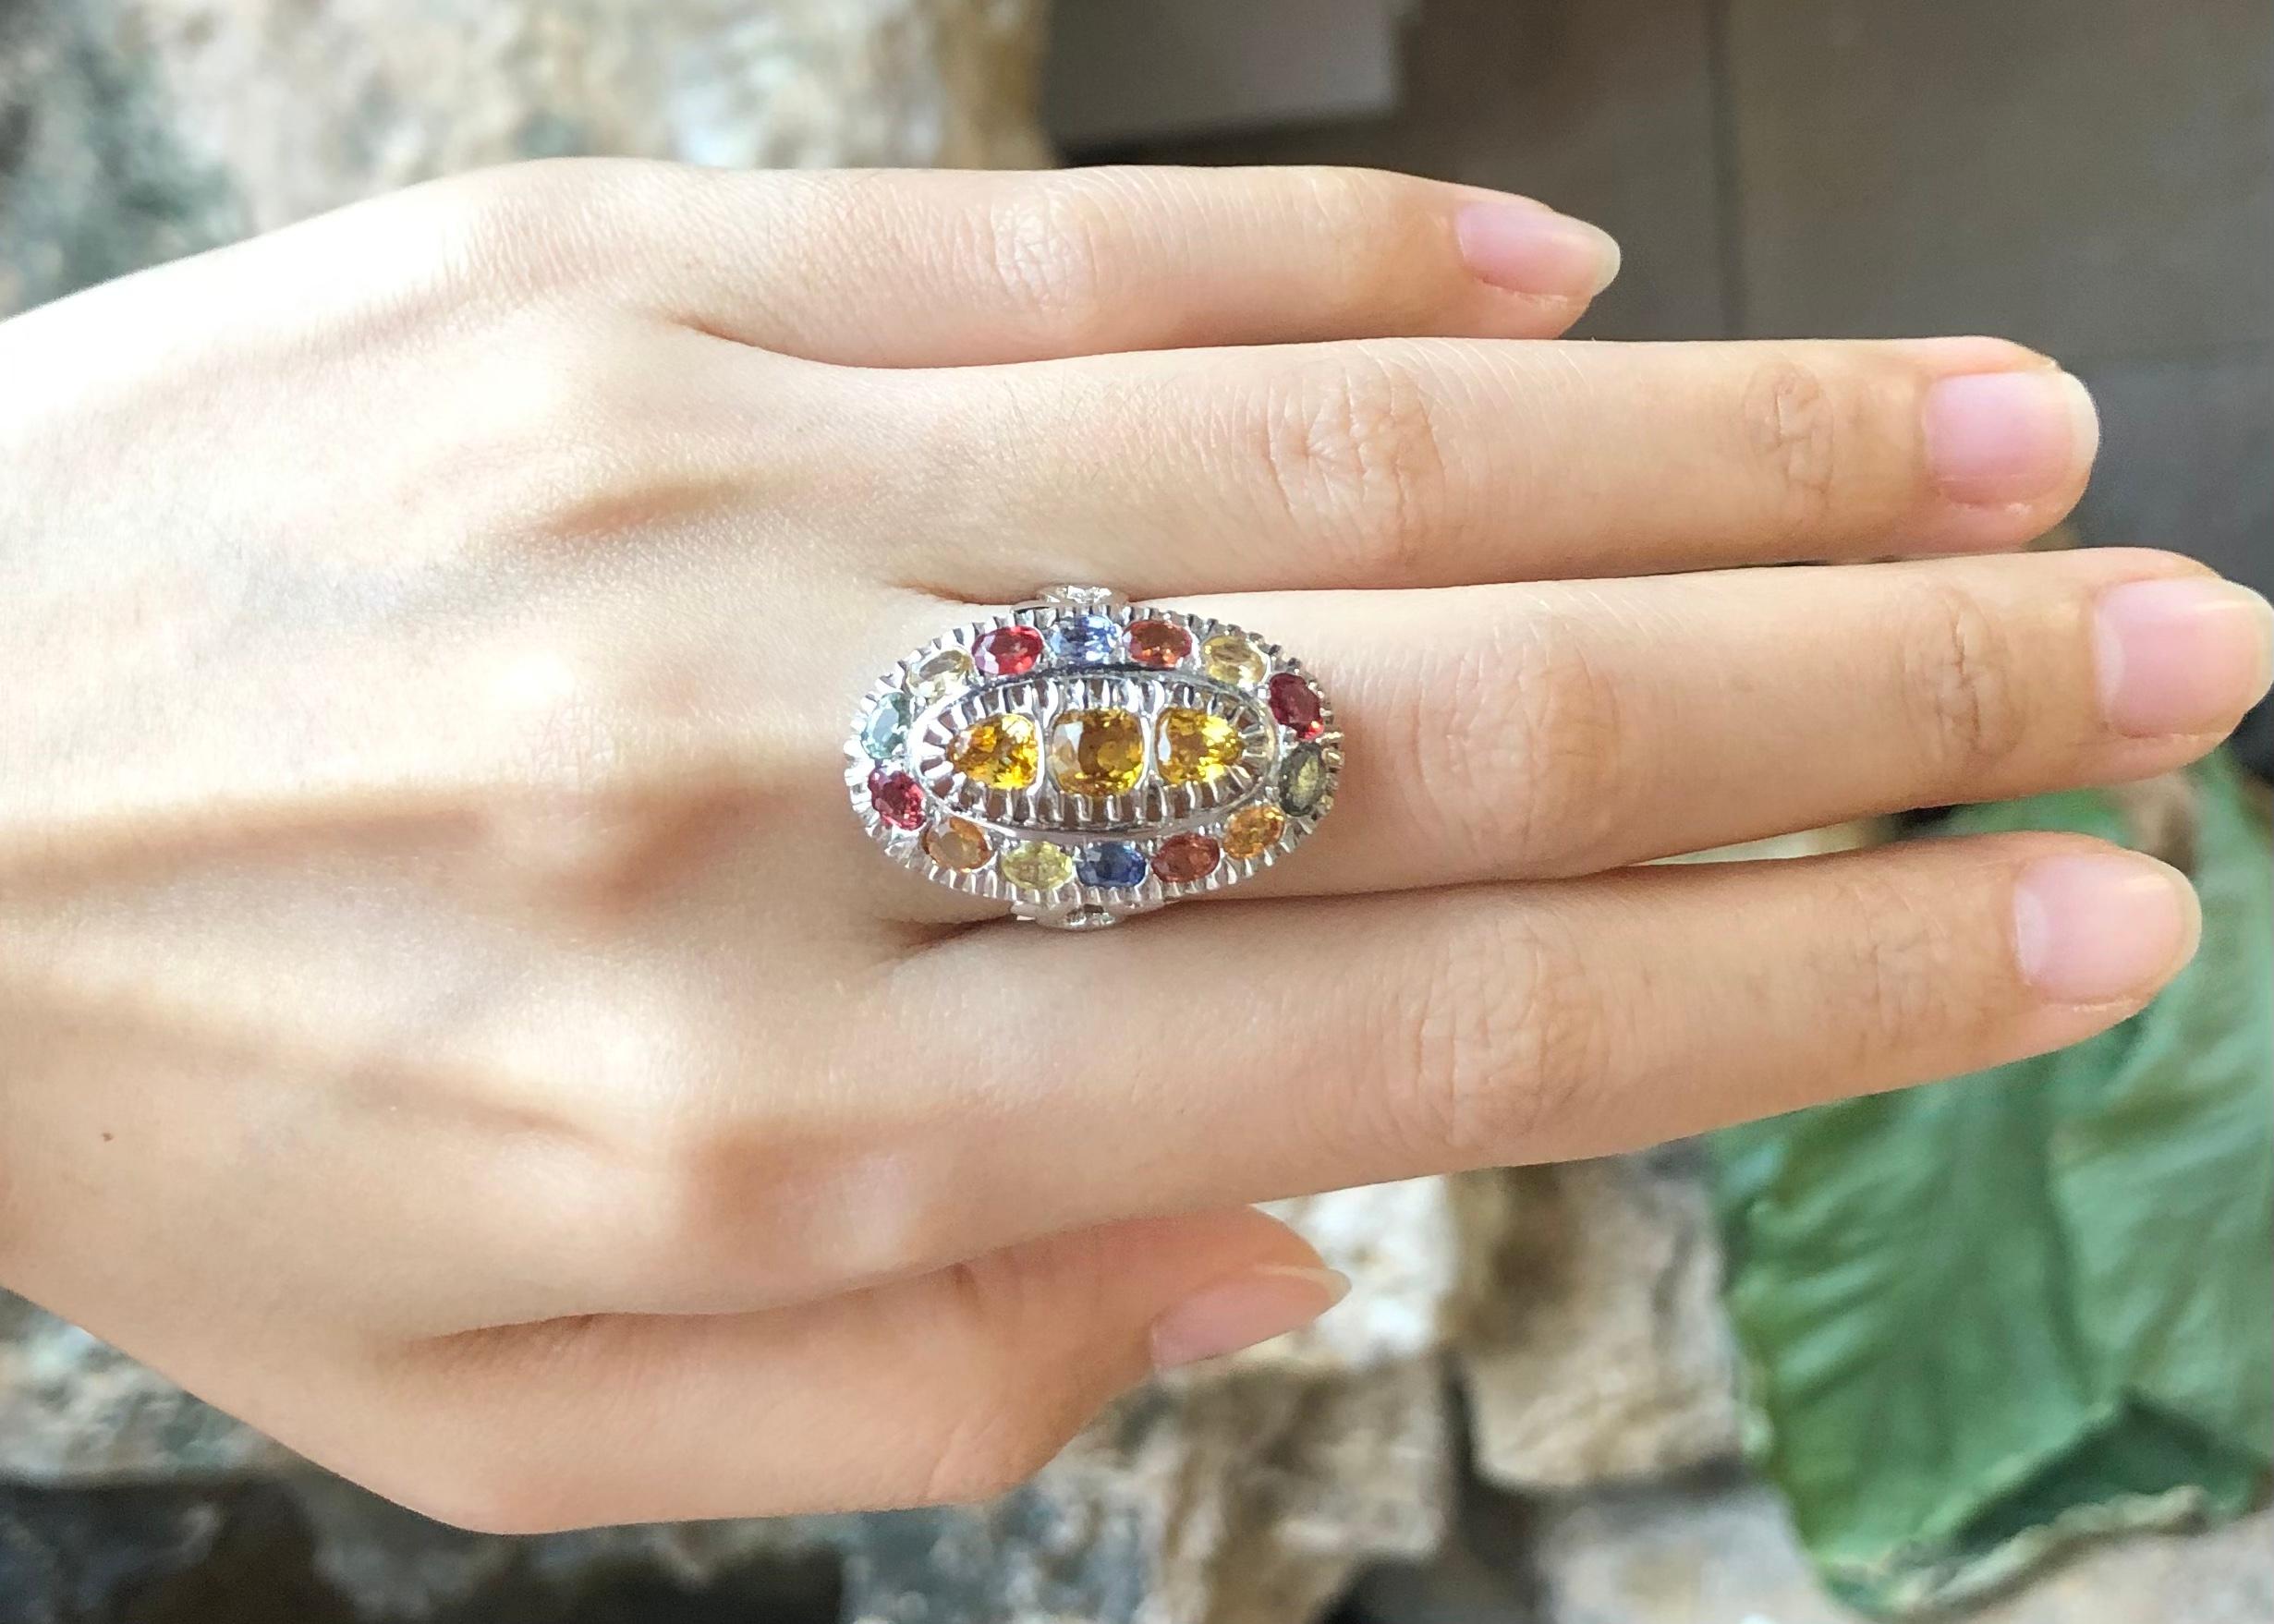 Rainbow Colour Sapphire with Cubic Zirconia Ring set in Silver Settings

Width:  1.5 cm 
Length: 2.7 cm
Ring Size: 55
Total Weight: 6.24 grams

*Please note that the silver setting is plated with rhodium to promote shine and help prevent oxidation. 